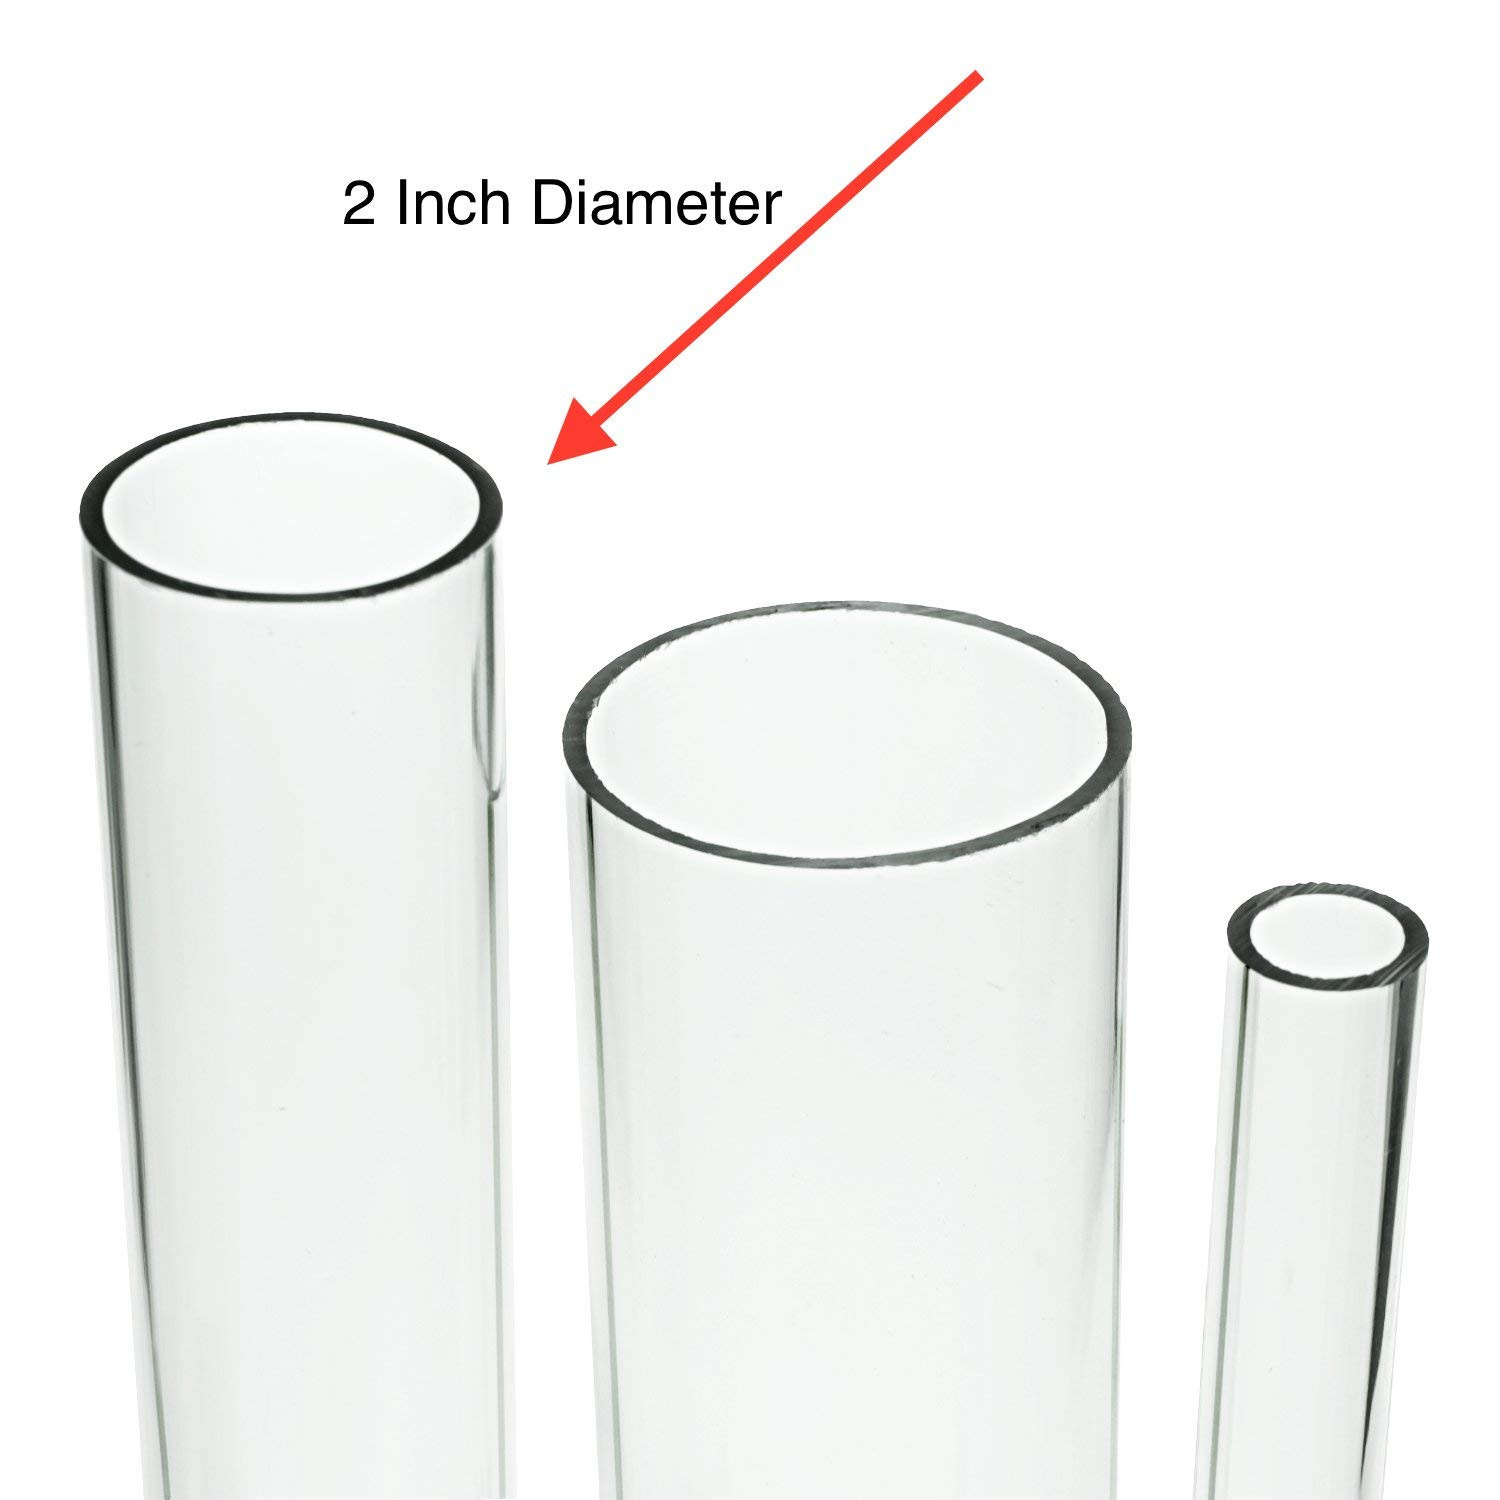 13 Spectacular 12 Inch Glass Cylinder Vase 2024 free download 12 inch glass cylinder vase of amazon com source one deluxe clear acrylic tube 2 inches thick 12 intended for amazon com source one deluxe clear acrylic tube 2 inches thick 12 inch 2 inch wi